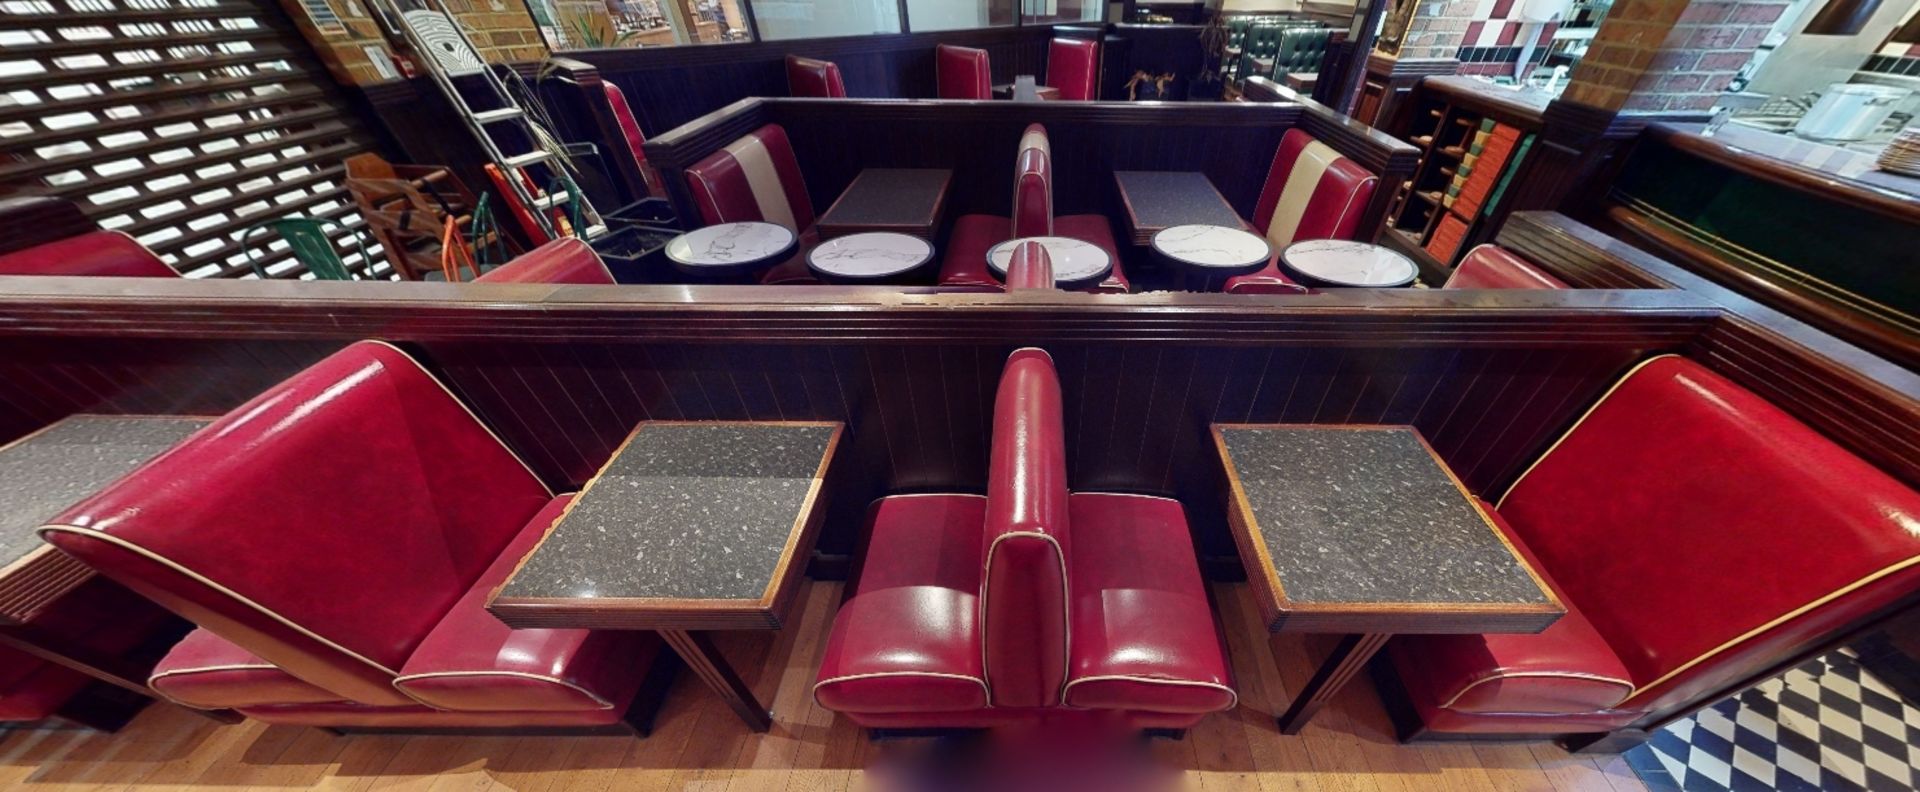 Large Collection of Restaurant Seating Benches and Tables From a Popular 1950's Inspired Italian- - Image 5 of 7